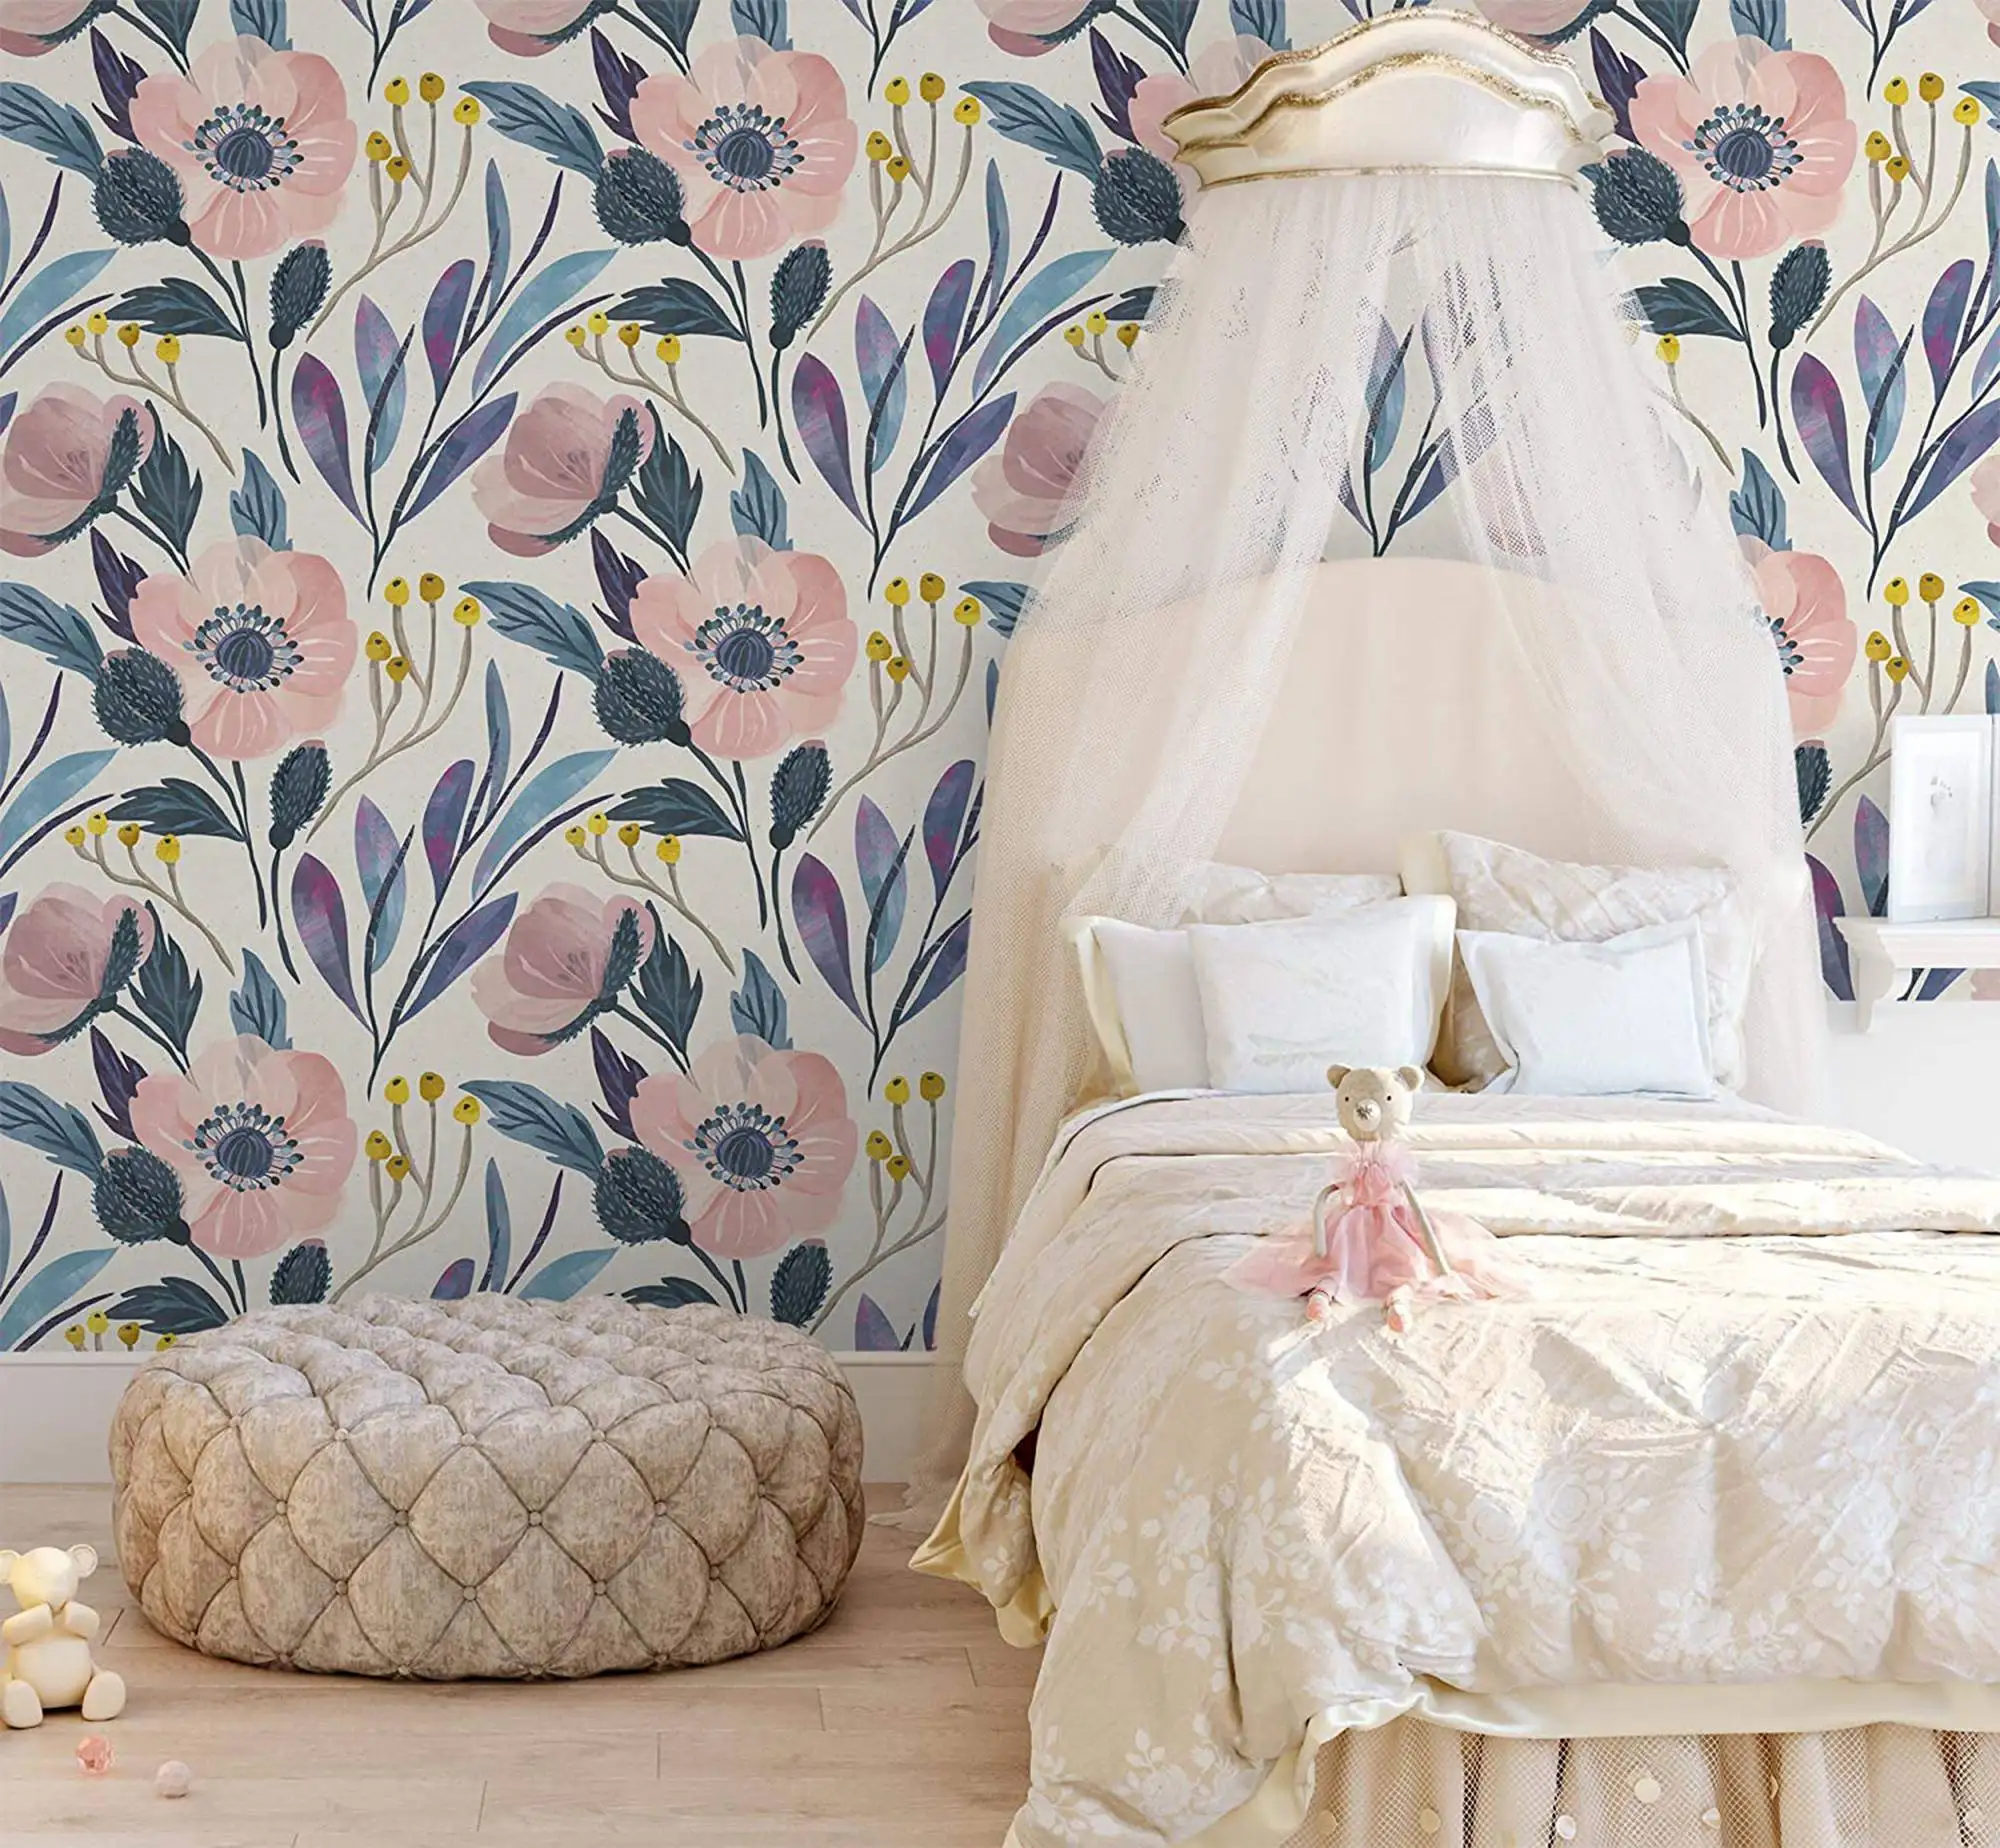 Moody, Removable Wallpaper, Nursery Wall Decor, Nursery Wallpaper, Wallpaper,  Non-woven Wallpaper, Baby Girl Room Et775830335 - Wallpapers - AliExpress